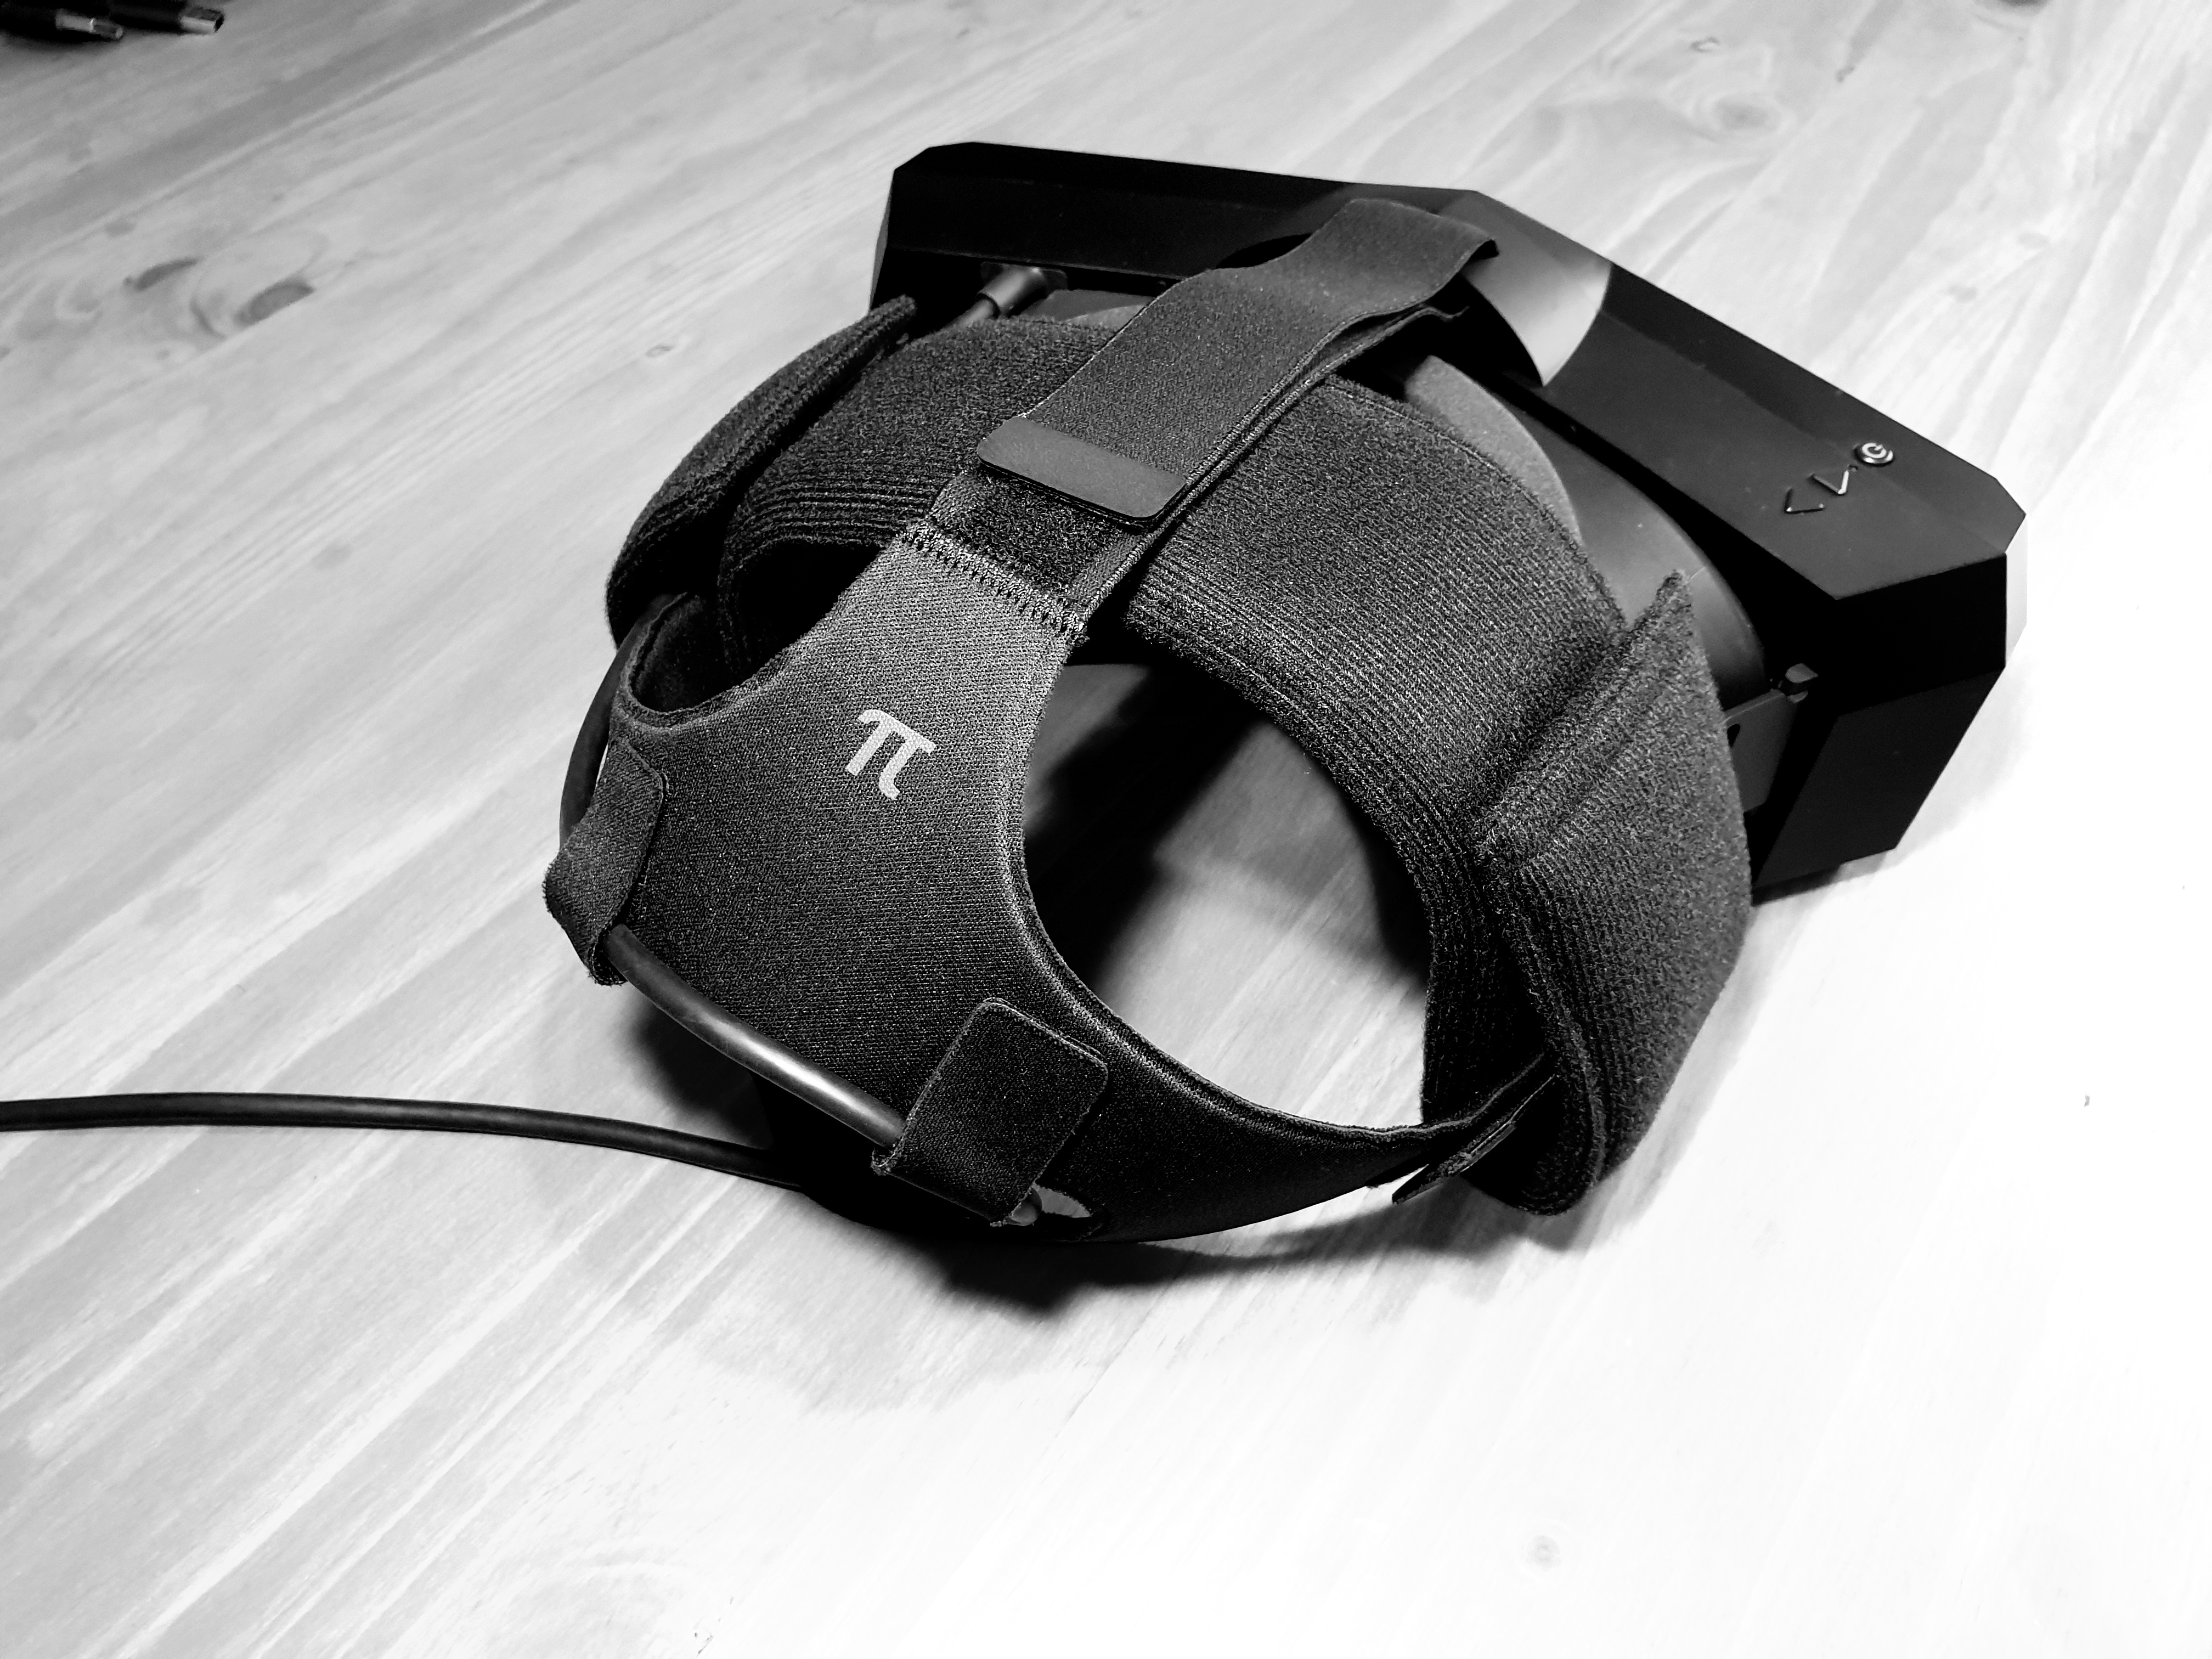 New Comfort Mods For Pimax Head Strap. Available To Buy Now